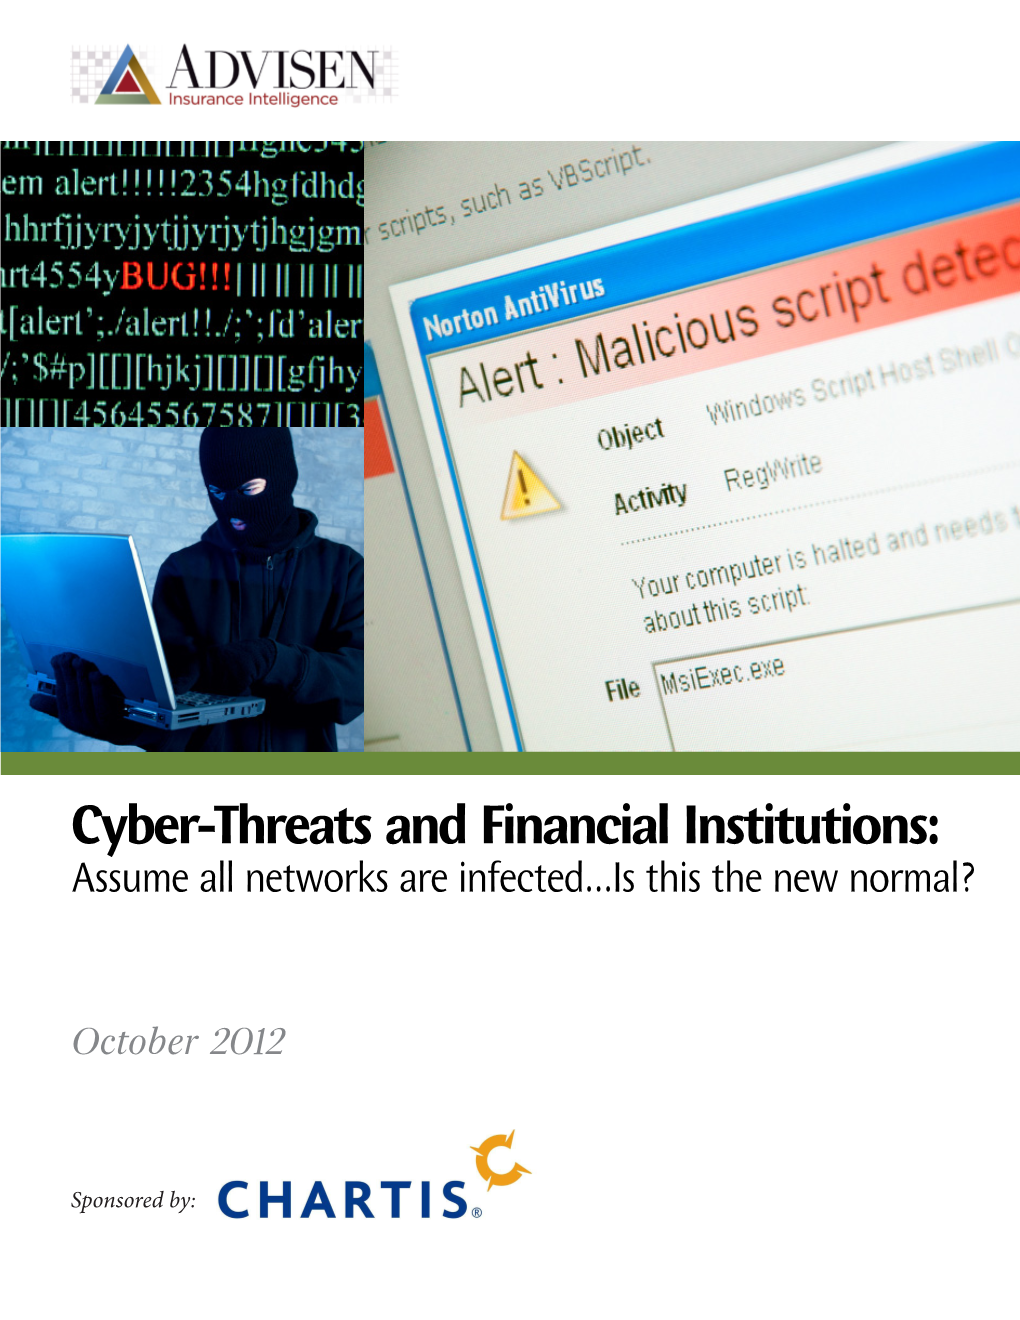 Cyber-Threats and Financial Institutions: Assume All Networks Are Infected...Is This the New Normal?